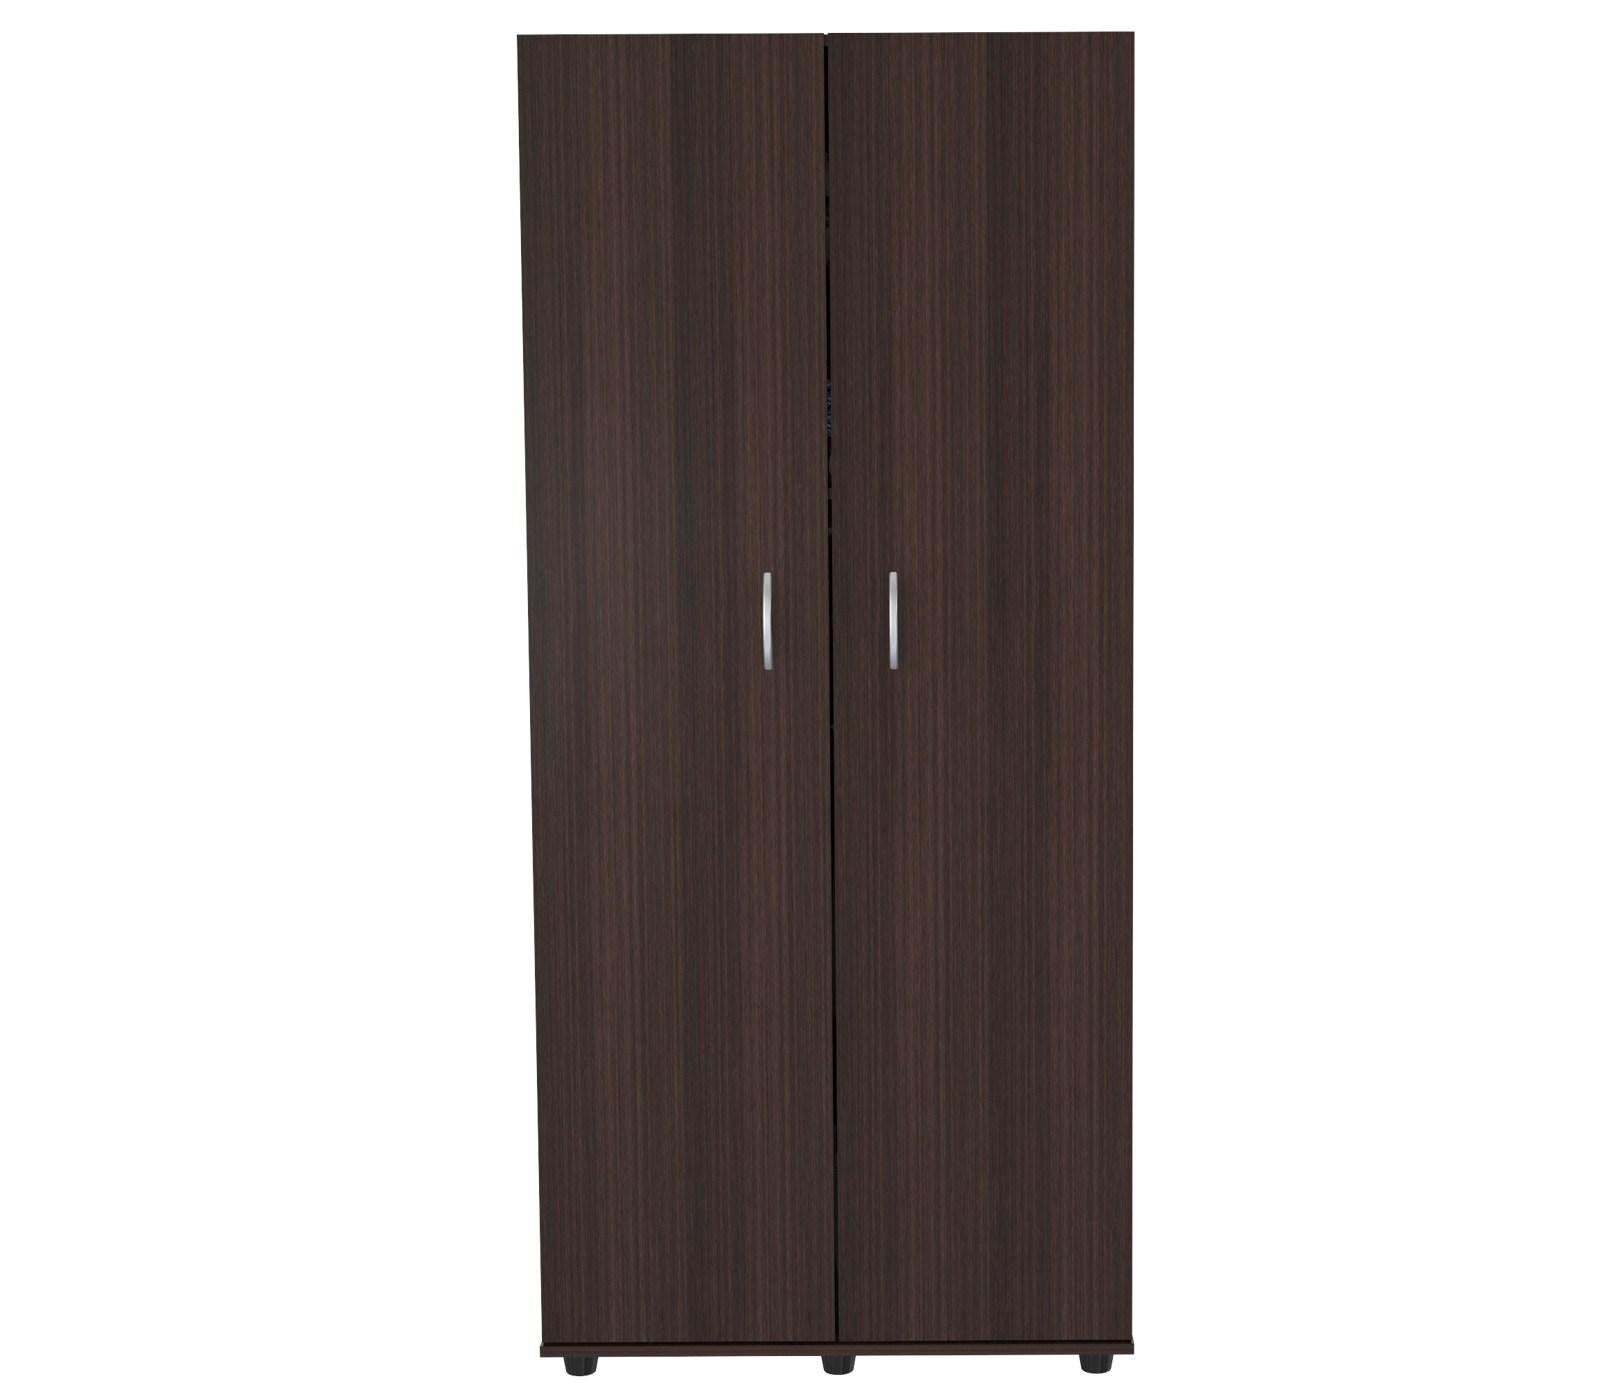 Espresso Finish Wood Wardrobe with Two Doors